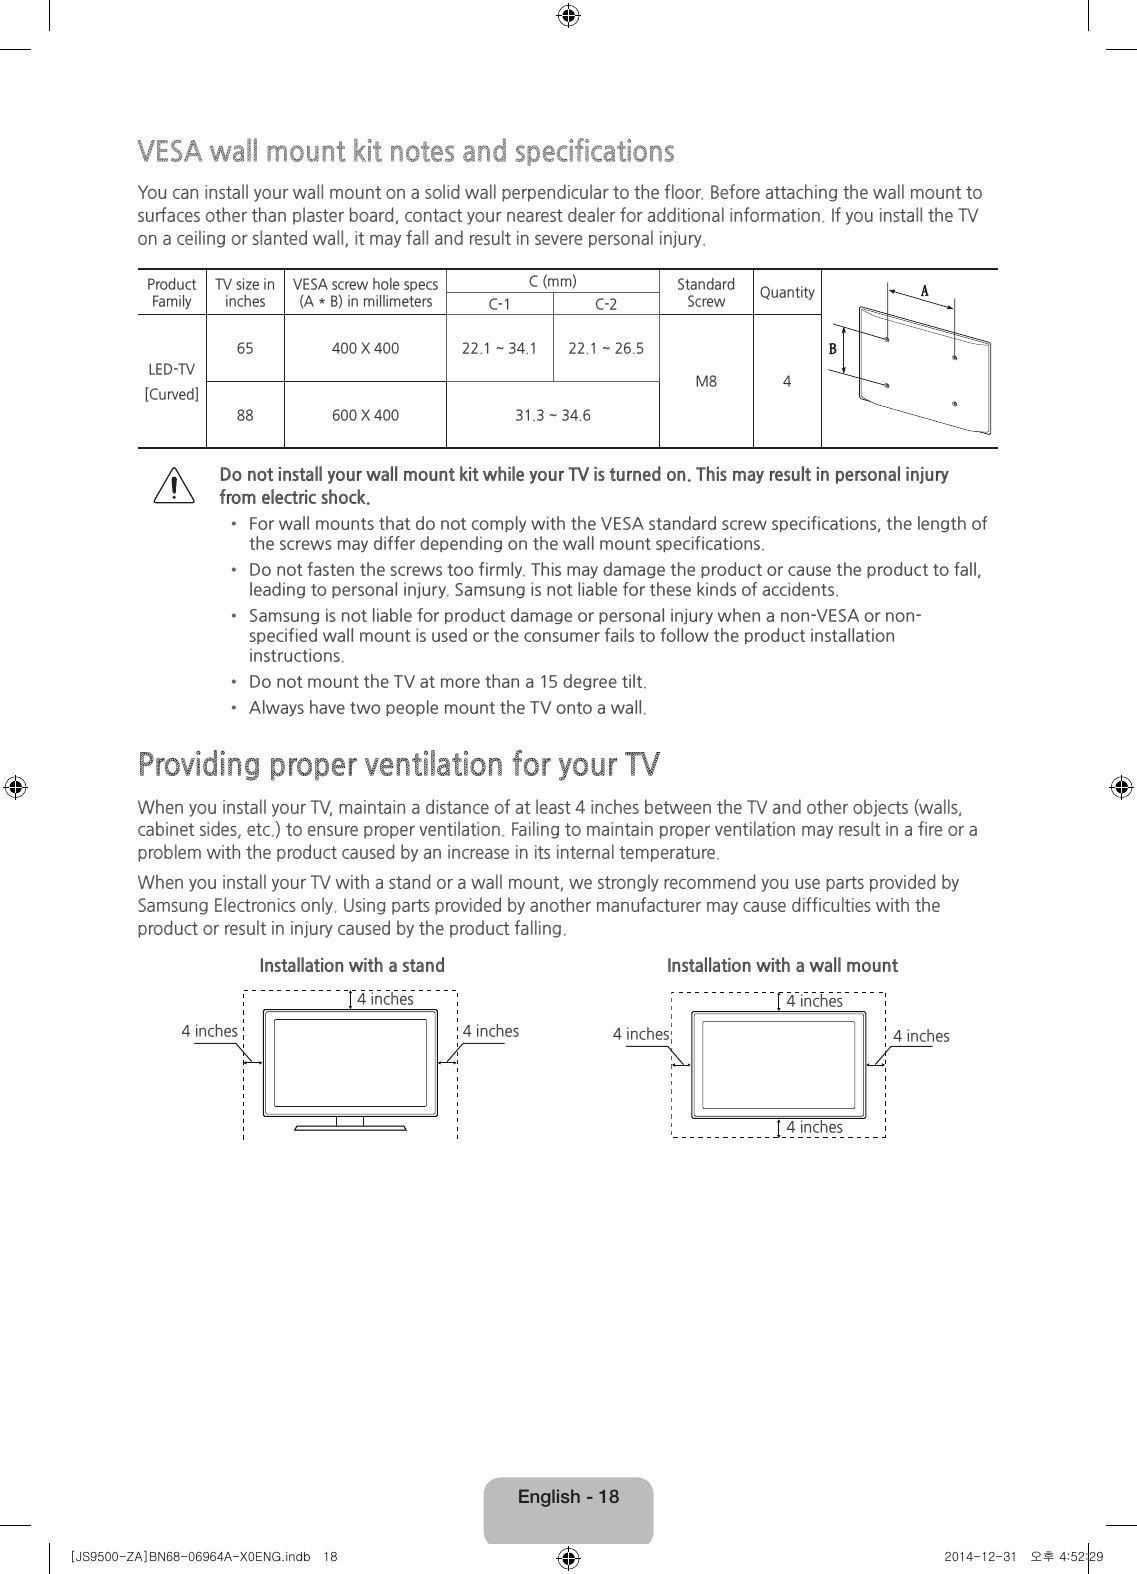 English - 18VESA wall mount kit notes and specificationsYou can install your wall mount on a solid wall perpendicular to the floor. Before attaching the wall mount to surfaces other than plaster board, contact your nearest dealer for additional information. If you install the TV on a ceiling or slanted wall, it may fall and result in severe personal injury.Product FamilyTV size in inchesVESA screw hole specs (A * B) in millimetersC (mm) Standard Screw QuantityC-1 C-2LED-TV[Curved]65 400 X 400 22.1 ~ 34.1 22.1 ~ 26.5M8 488 600 X 400 31.3 ~ 34.6Do not install your wall mount kit while your TV is turned on. This may result in personal injury from electric shock.• For wall mounts that do not comply with the VESA standard screw specifications, the length of the screws may differ depending on the wall mount specifications.• Do not fasten the screws too firmly. This may damage the product or cause the product to fall, leading to personal injury. Samsung is not liable for these kinds of accidents.• Samsung is not liable for product damage or personal injury when a non-VESA or non-specified wall mount is used or the consumer fails to follow the product installation instructions. • Do not mount the TV at more than a 15 degree tilt.• Always have two people mount the TV onto a wall.Providing proper ventilation for your TVWhen you install your TV, maintain a distance of at least 4 inches between the TV and other objects (walls, cabinet sides, etc.) to ensure proper ventilation. Failing to maintain proper ventilation may result in a fire or a problem with the product caused by an increase in its internal temperature.When you install your TV with a stand or a wall mount, we strongly recommend you use parts provided by Samsung Electronics only. Using parts provided by another manufacturer may cause difficulties with the product or result in injury caused by the product falling.Installation with a stand Installation with a wall mount4 inches4 inches4 inches 4 inches4 inches4 inches4 inches[JS9500-ZA]BN68-06964A-X0ENG.indb   18 2014-12-31   오후 4:52:29